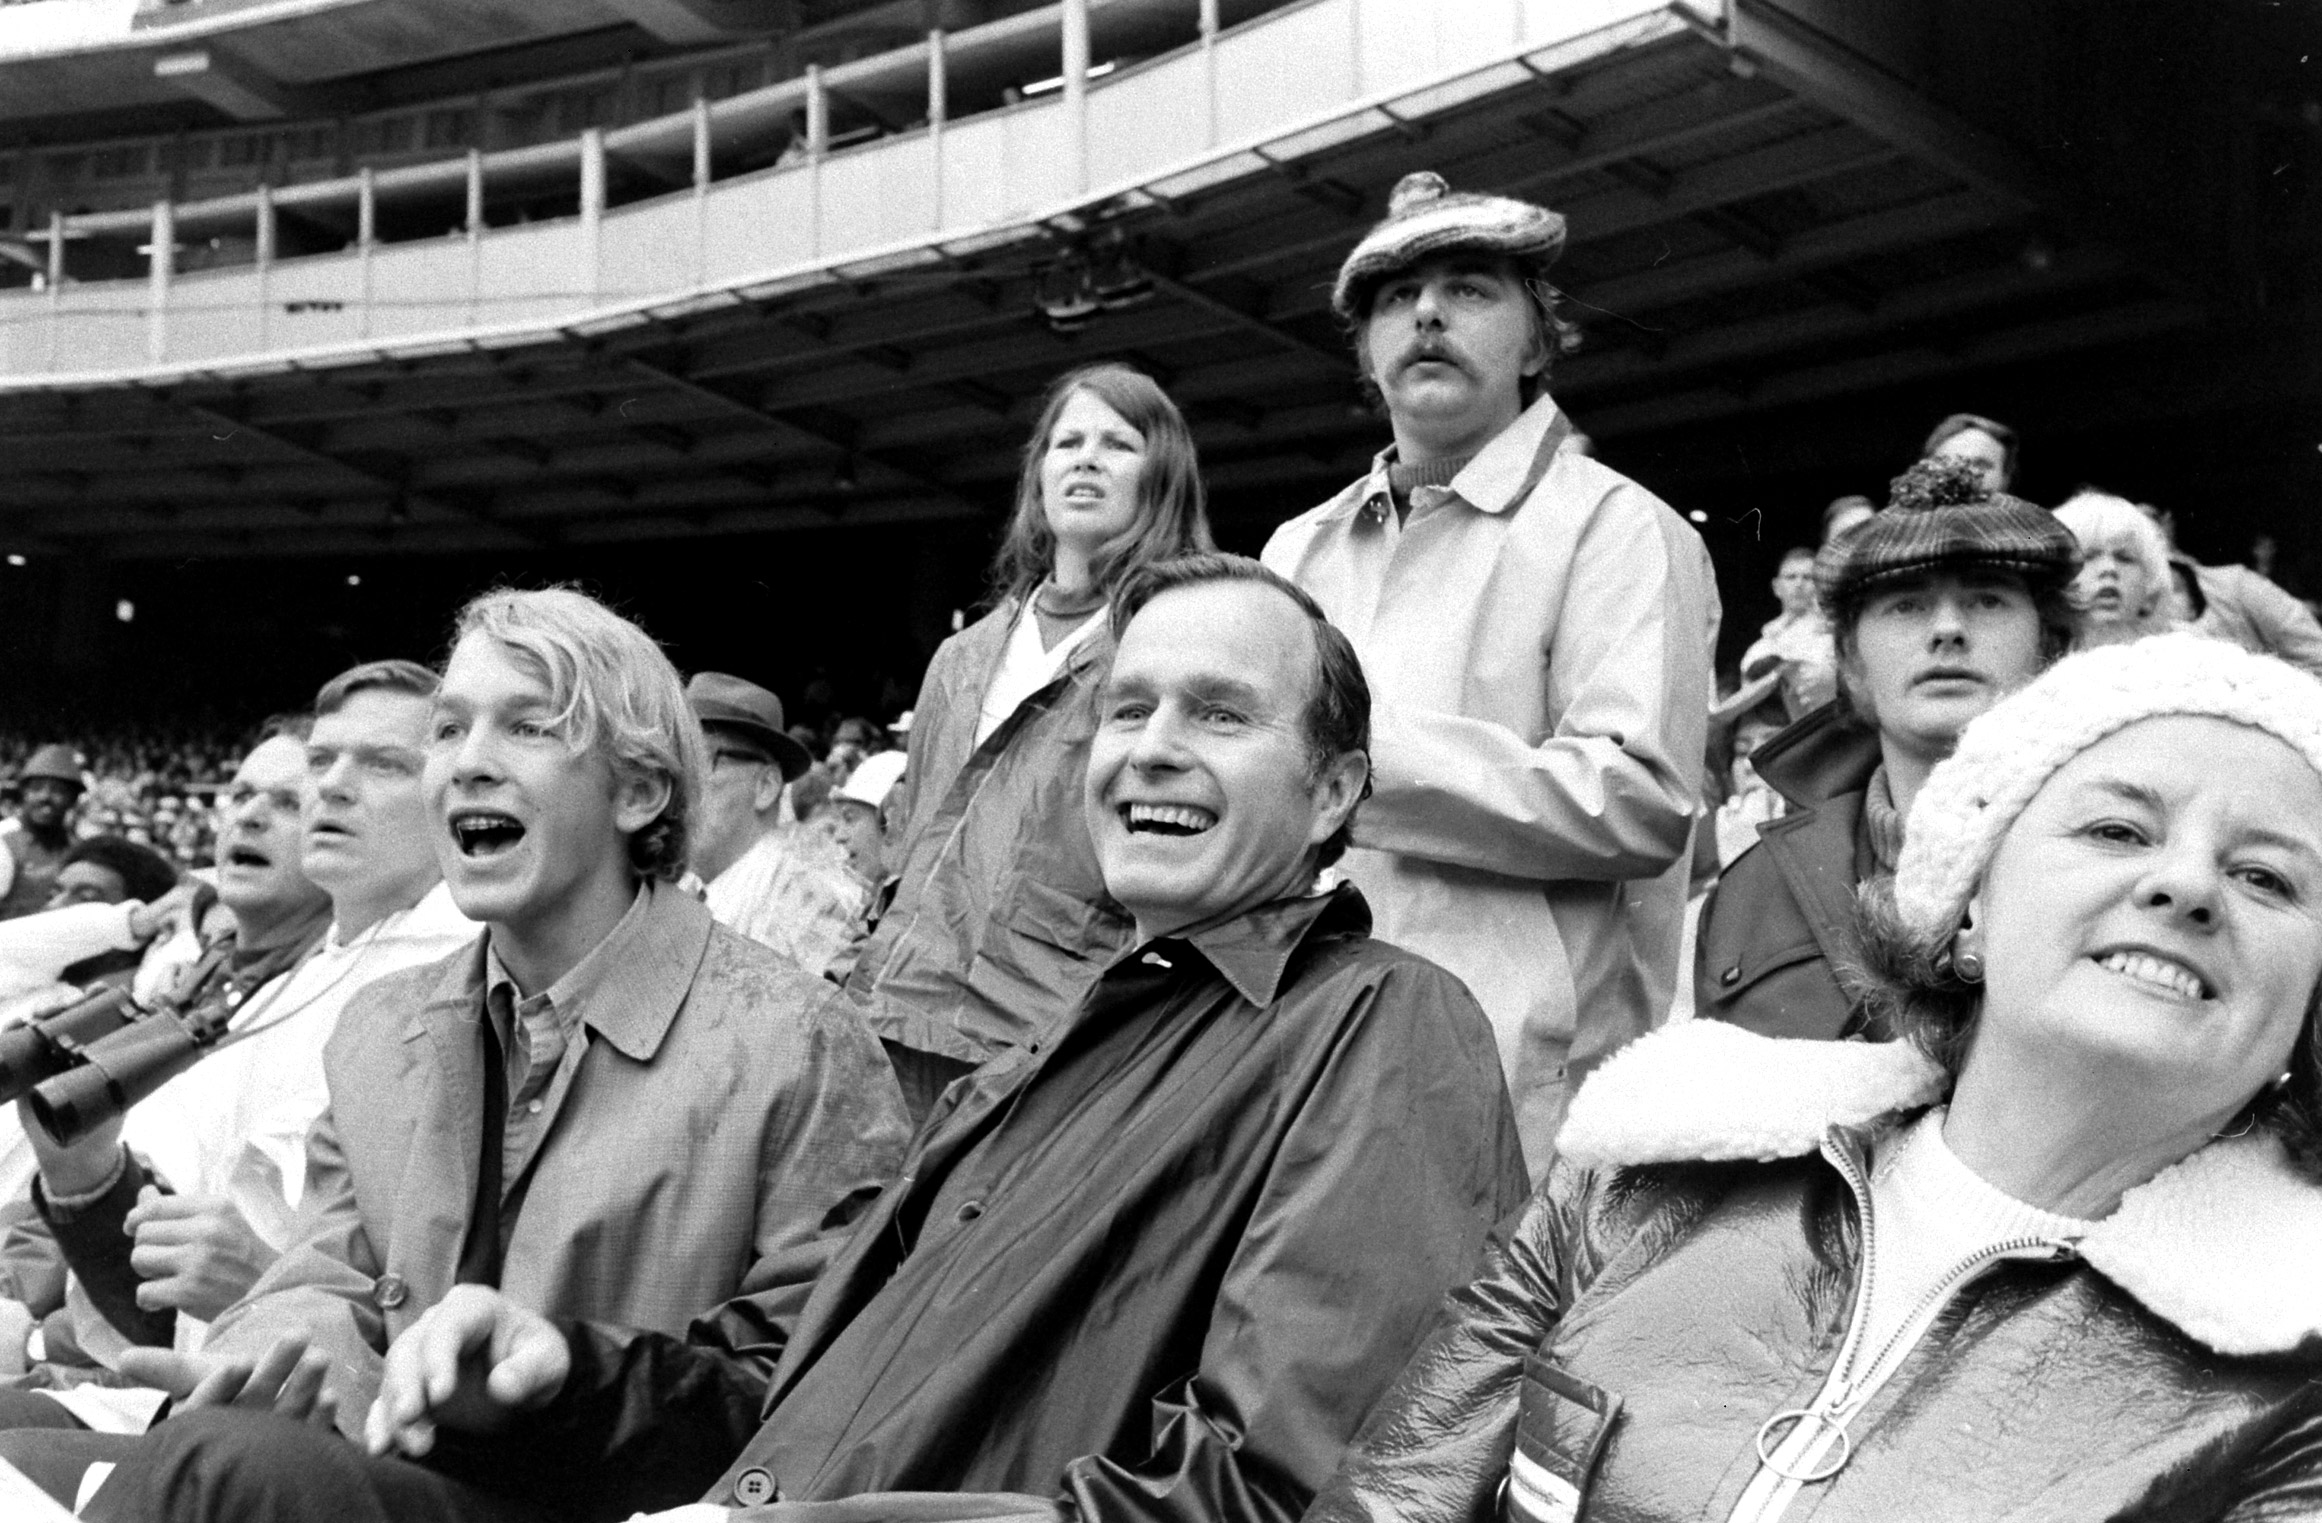 George H.W. Bush at a baseball game with son Marvin in 1971.